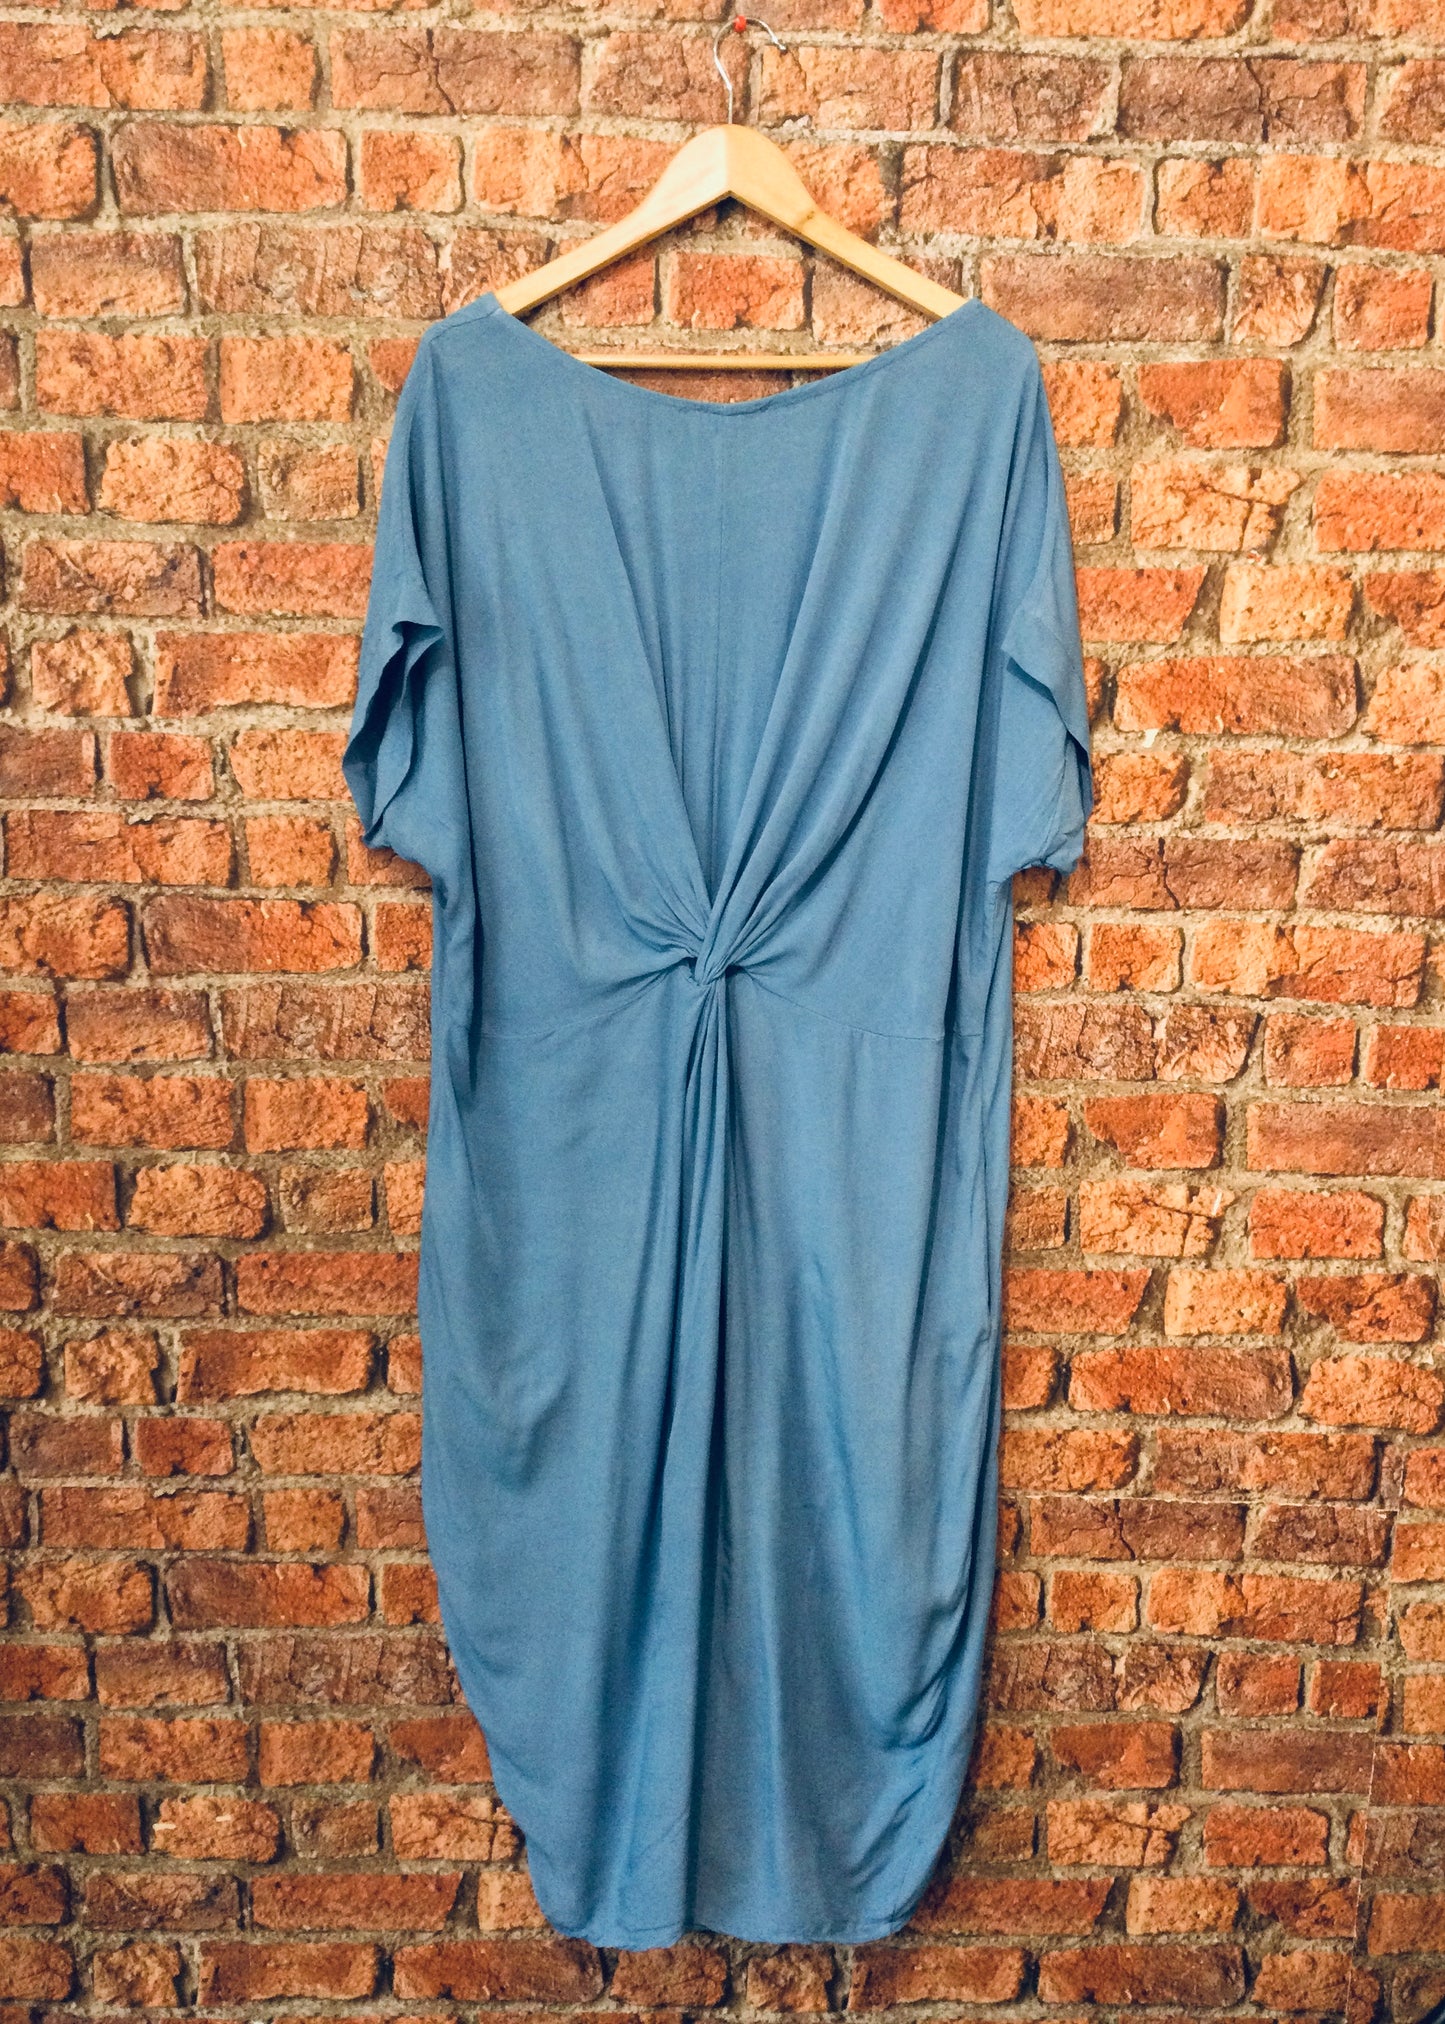 Sands - Draped dress with knot back detail*